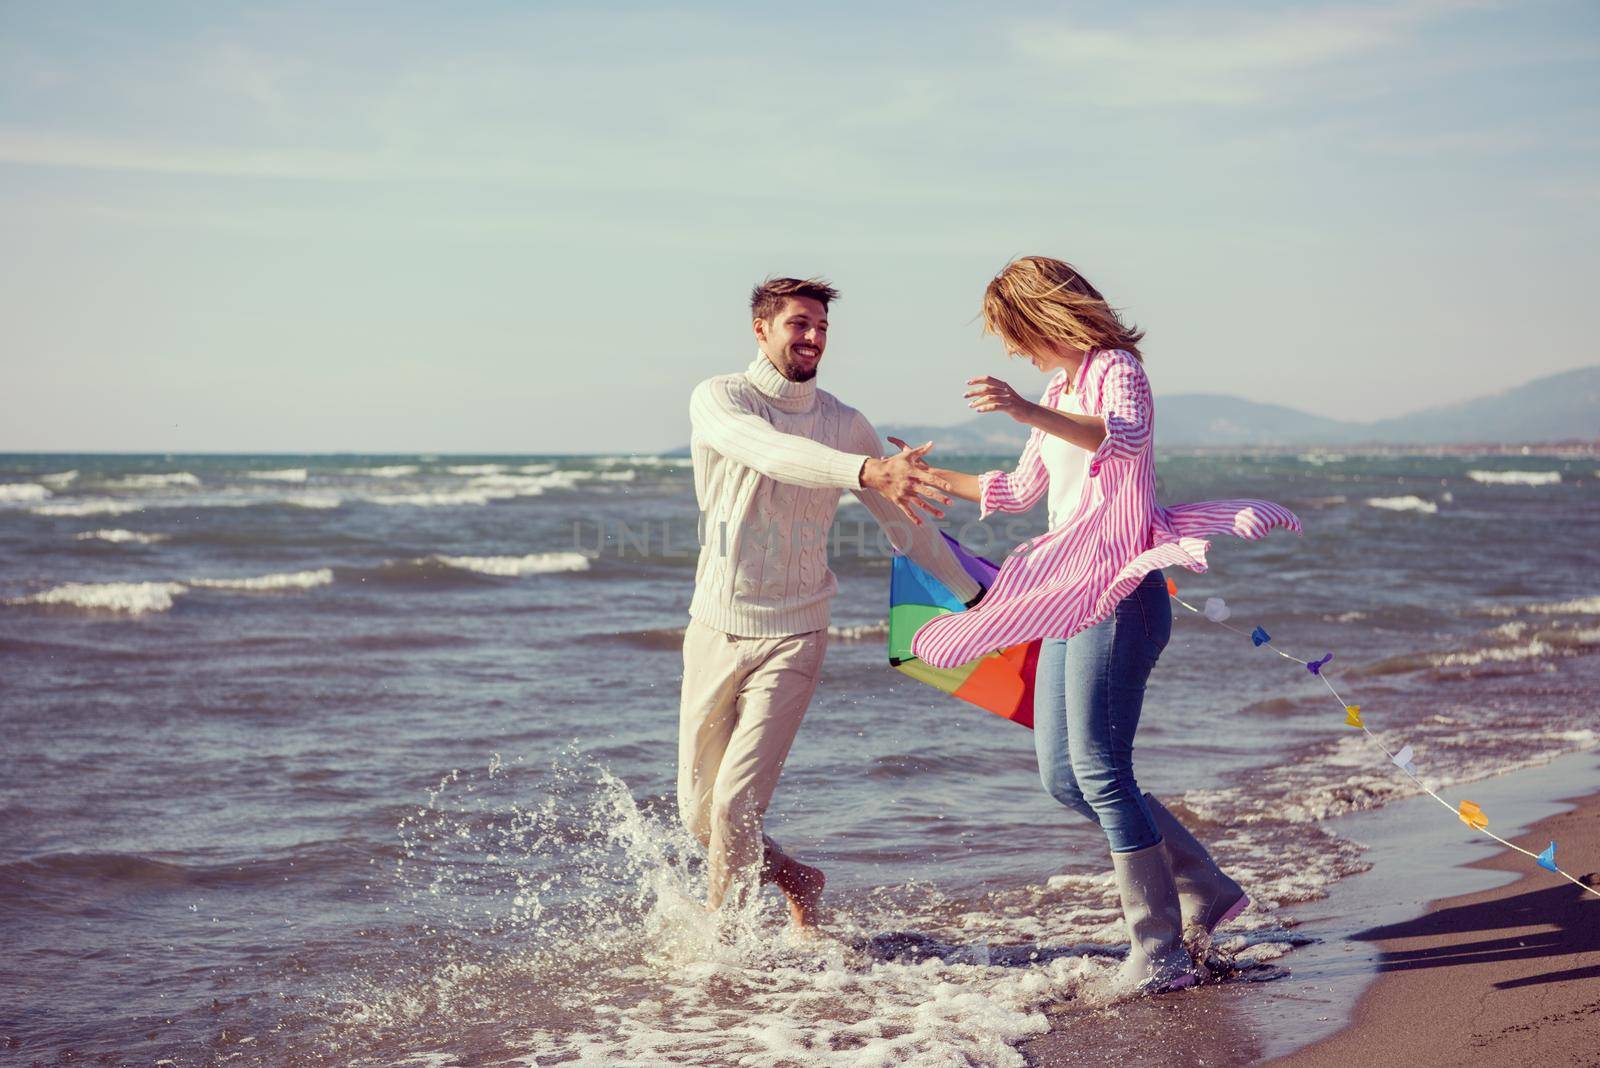 Young Couple having fun and Playing With A Kite On The Beach at autumn day filter